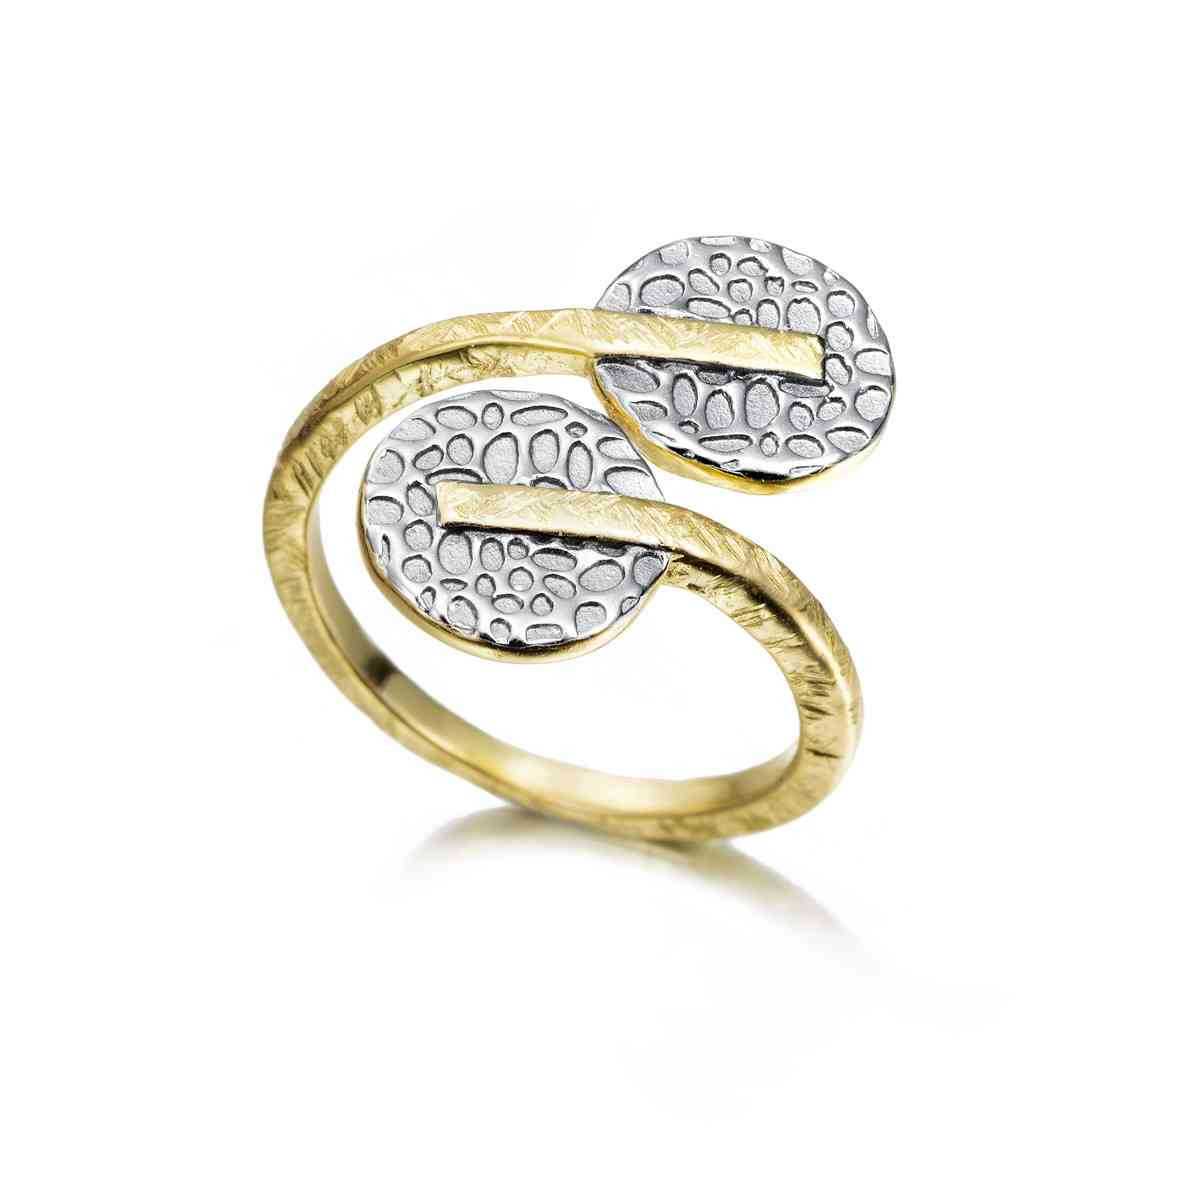 KYMBAL Ring in Silver. 18k Gold Vermeil